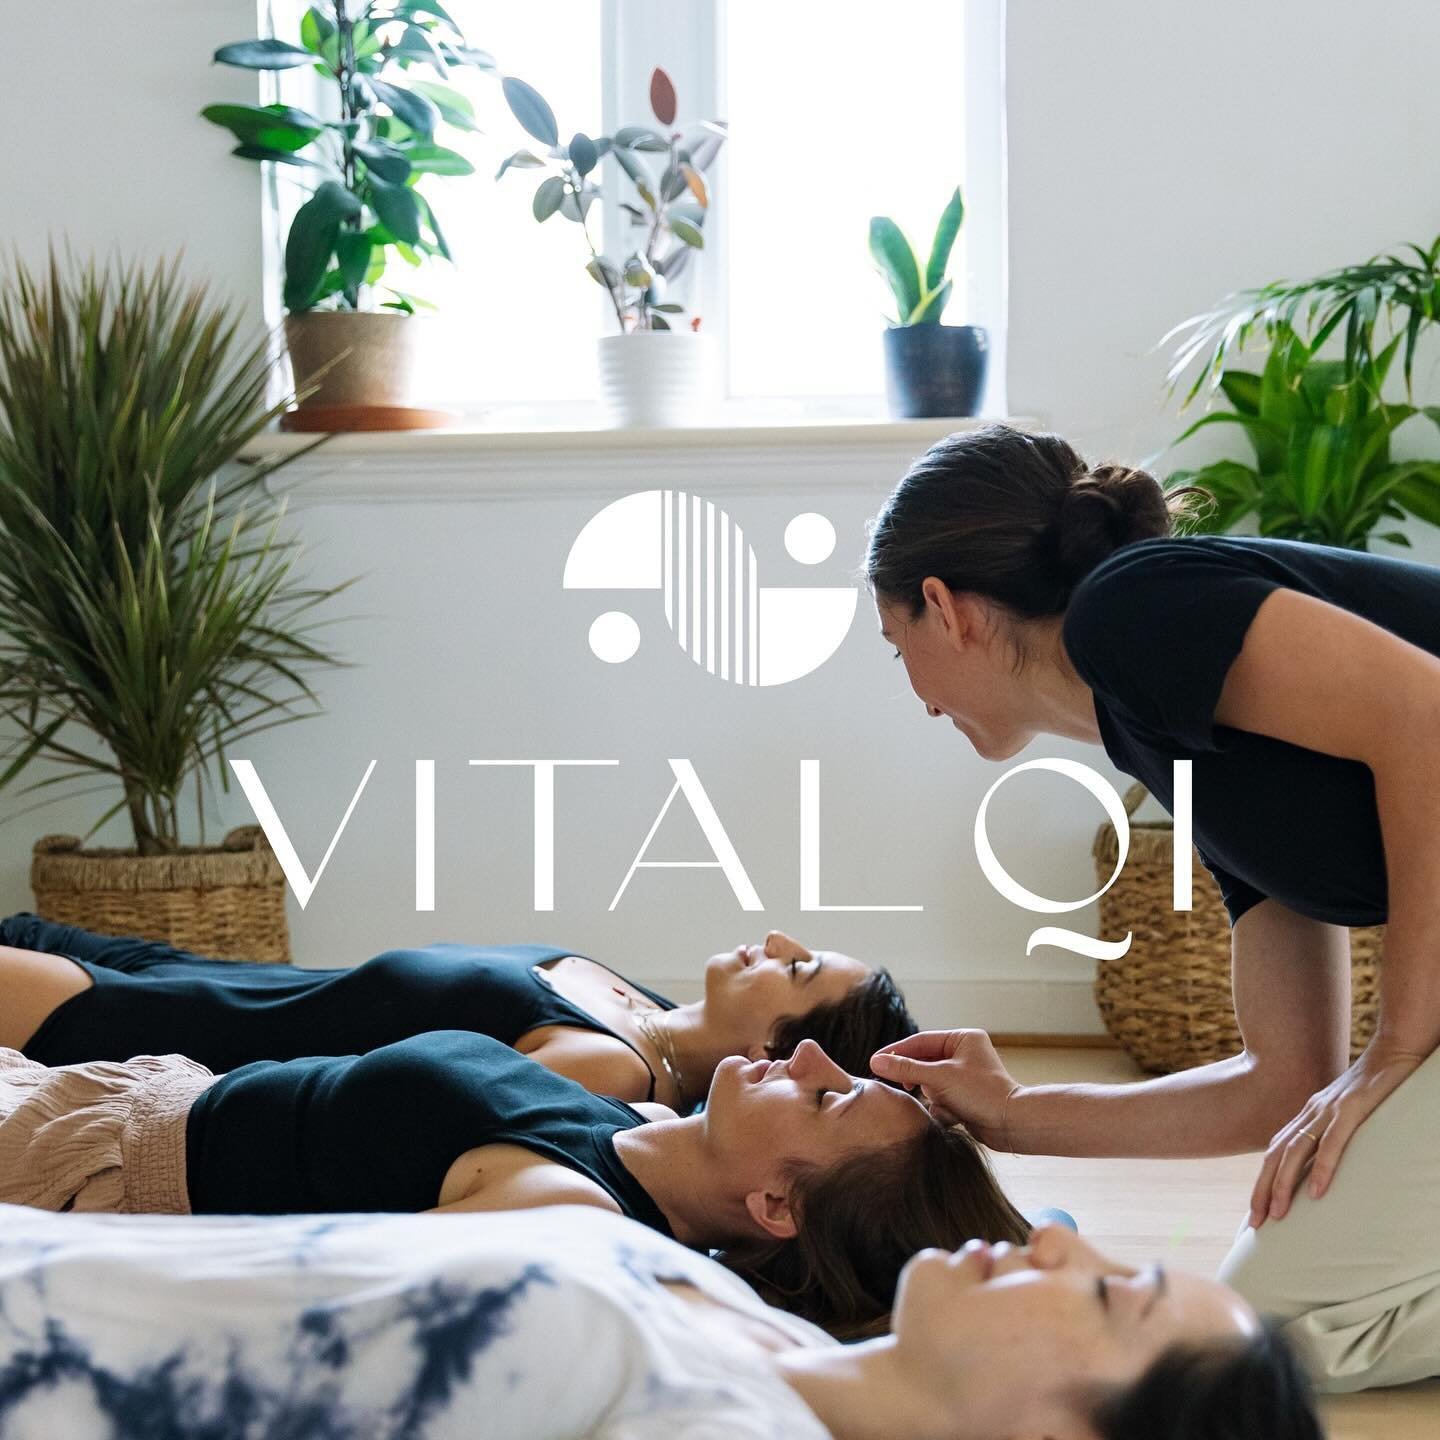 At @vitalqi we create spaces for people to come together and heal. 

It was always my goal to combine the power of acupuncture and human connection, and for a while in 2020 I doubted it would ever become a reality. We eased our way in as the world re